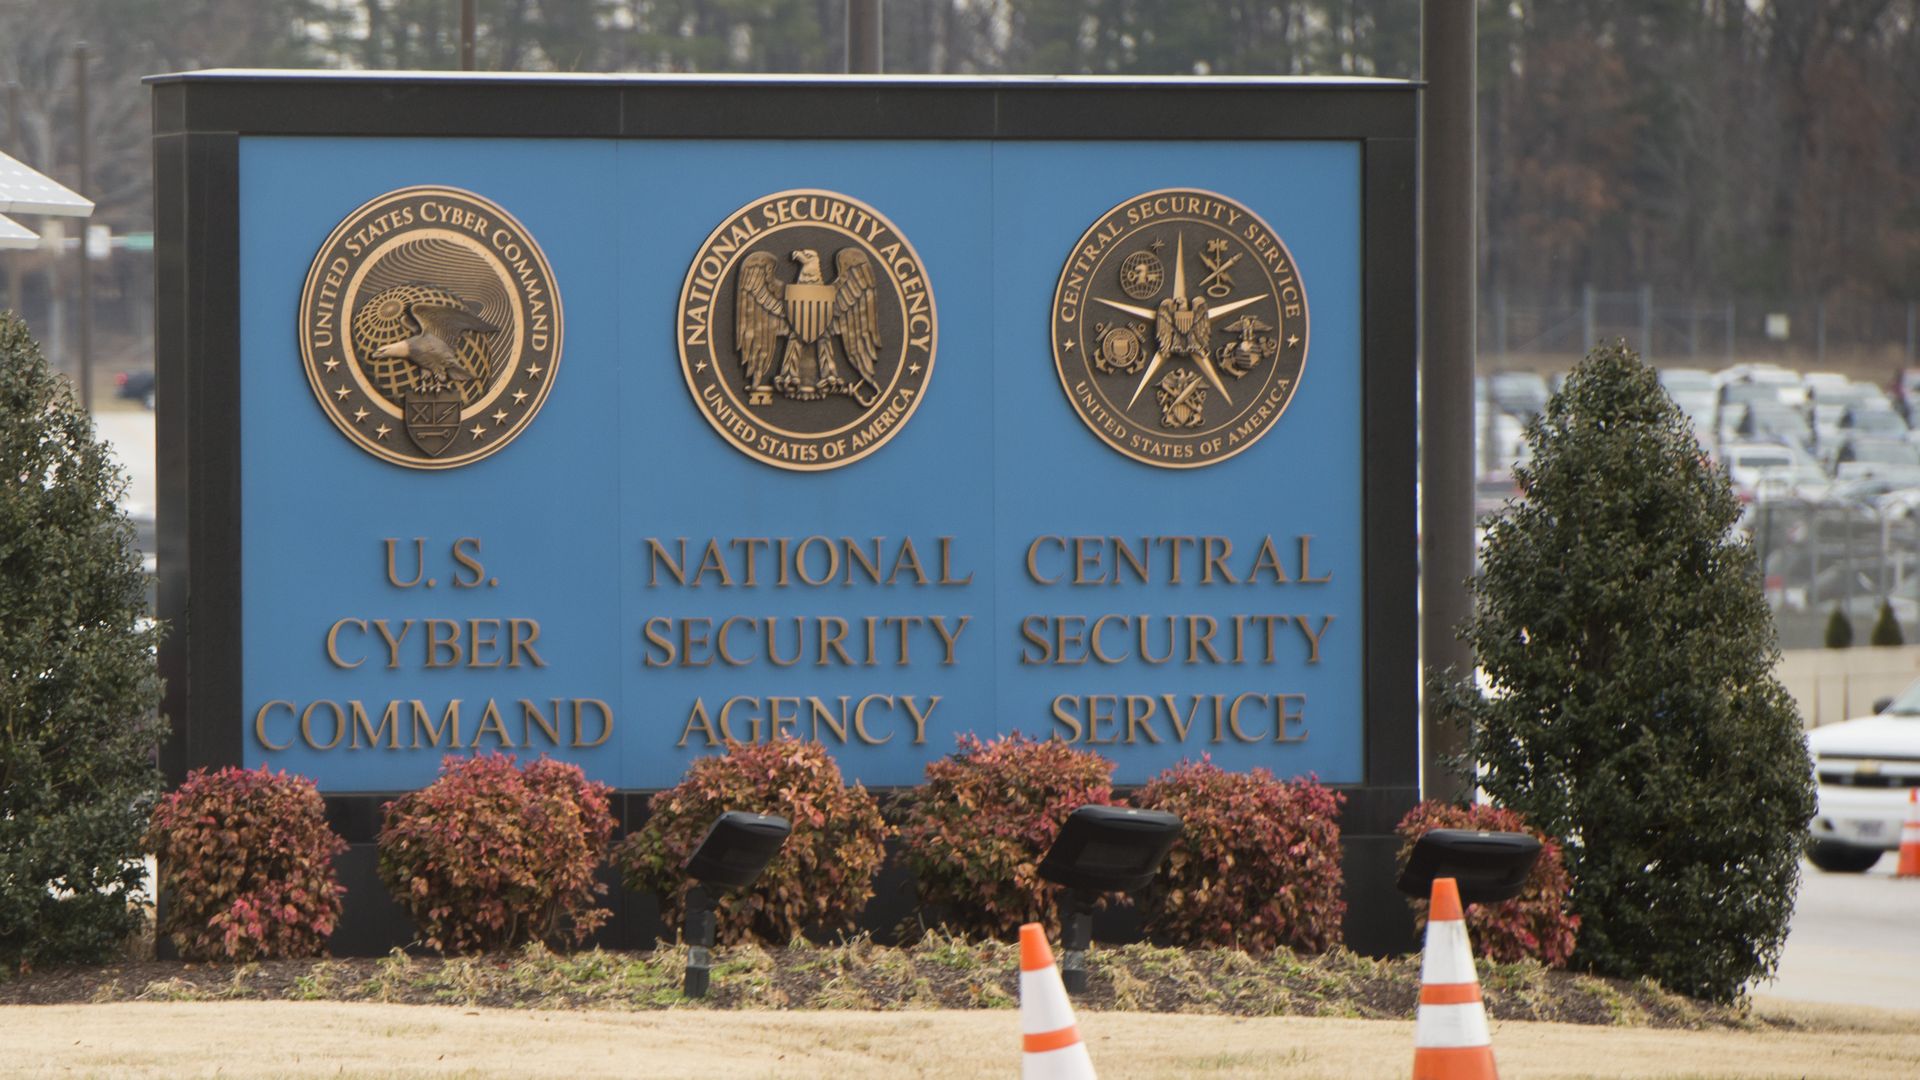 The National Security Agency headquarters in Fort Meade, Maryland. Photo: Saul Loeb/AFP/Getty Images